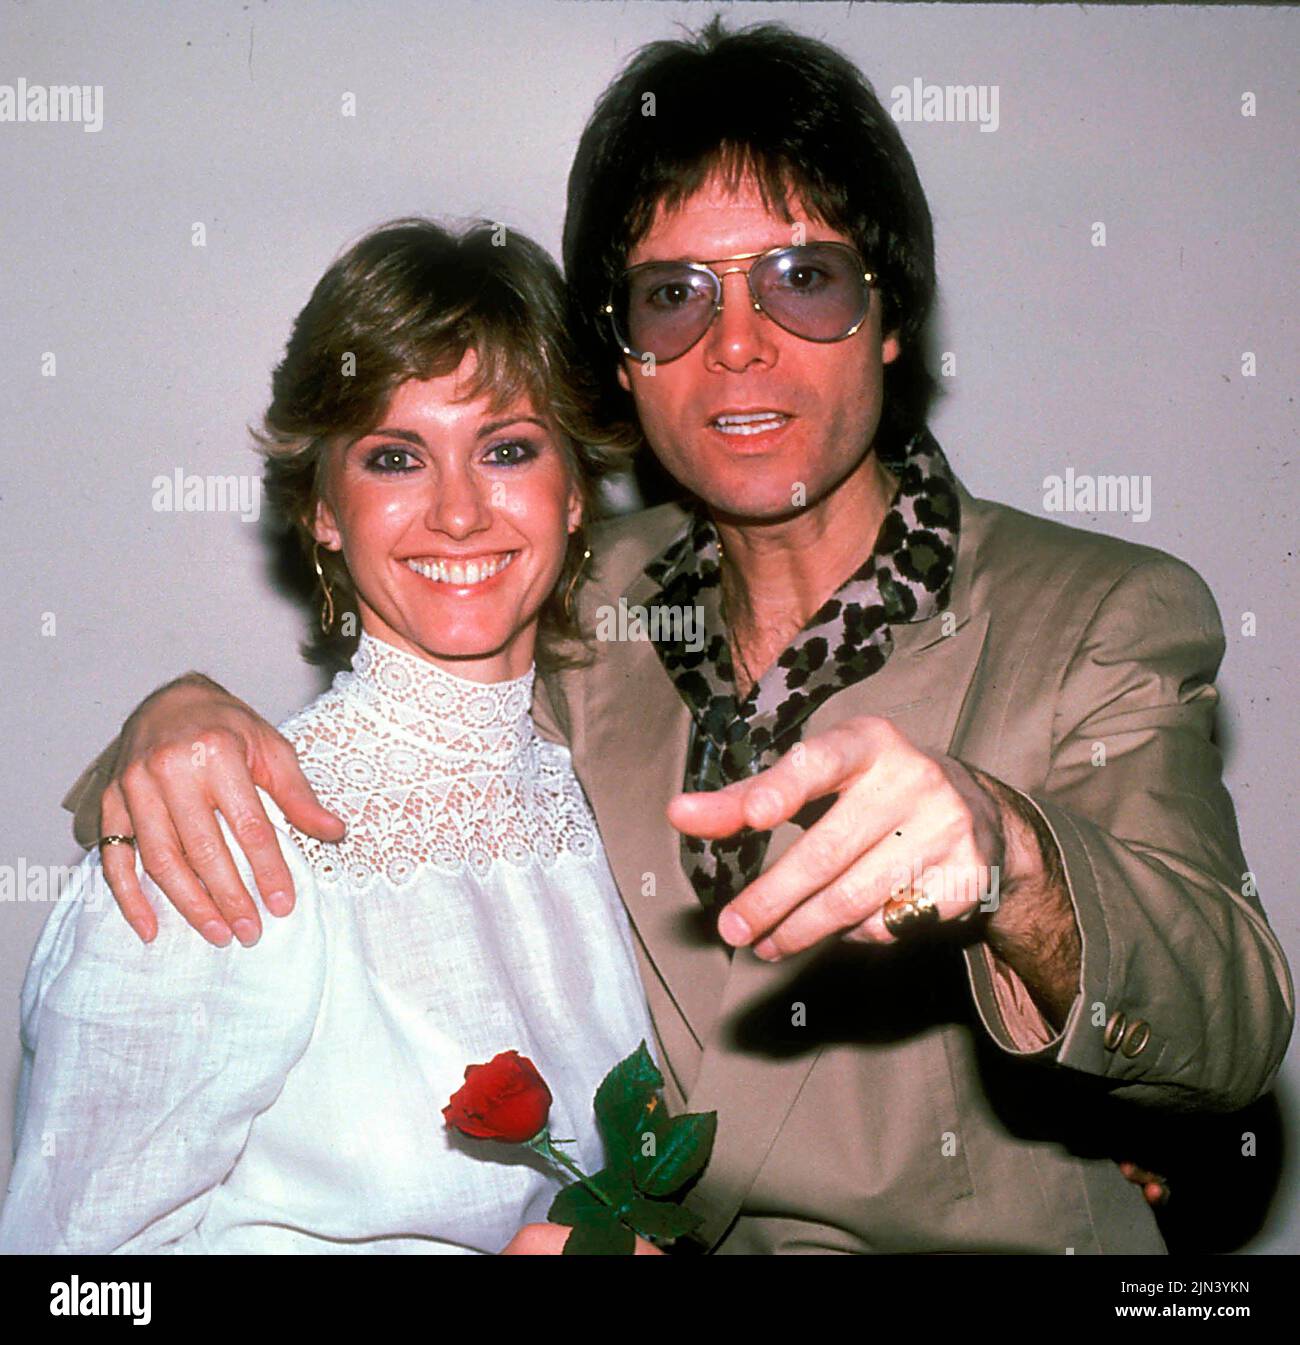 Circa 1983, London, England, United Kingdom: Singers OLIVIA NEWTON JOHN and CLIFF RICHARD. 'Suddenly' is a duet performed by Olivia Newton-John and Cliff Richard from the soundtrack 'Xanadu,' and is the love theme from the 1980 film of the same name. (Credit Image: © Globe Photos via ZUMA Wire) Stock Photo